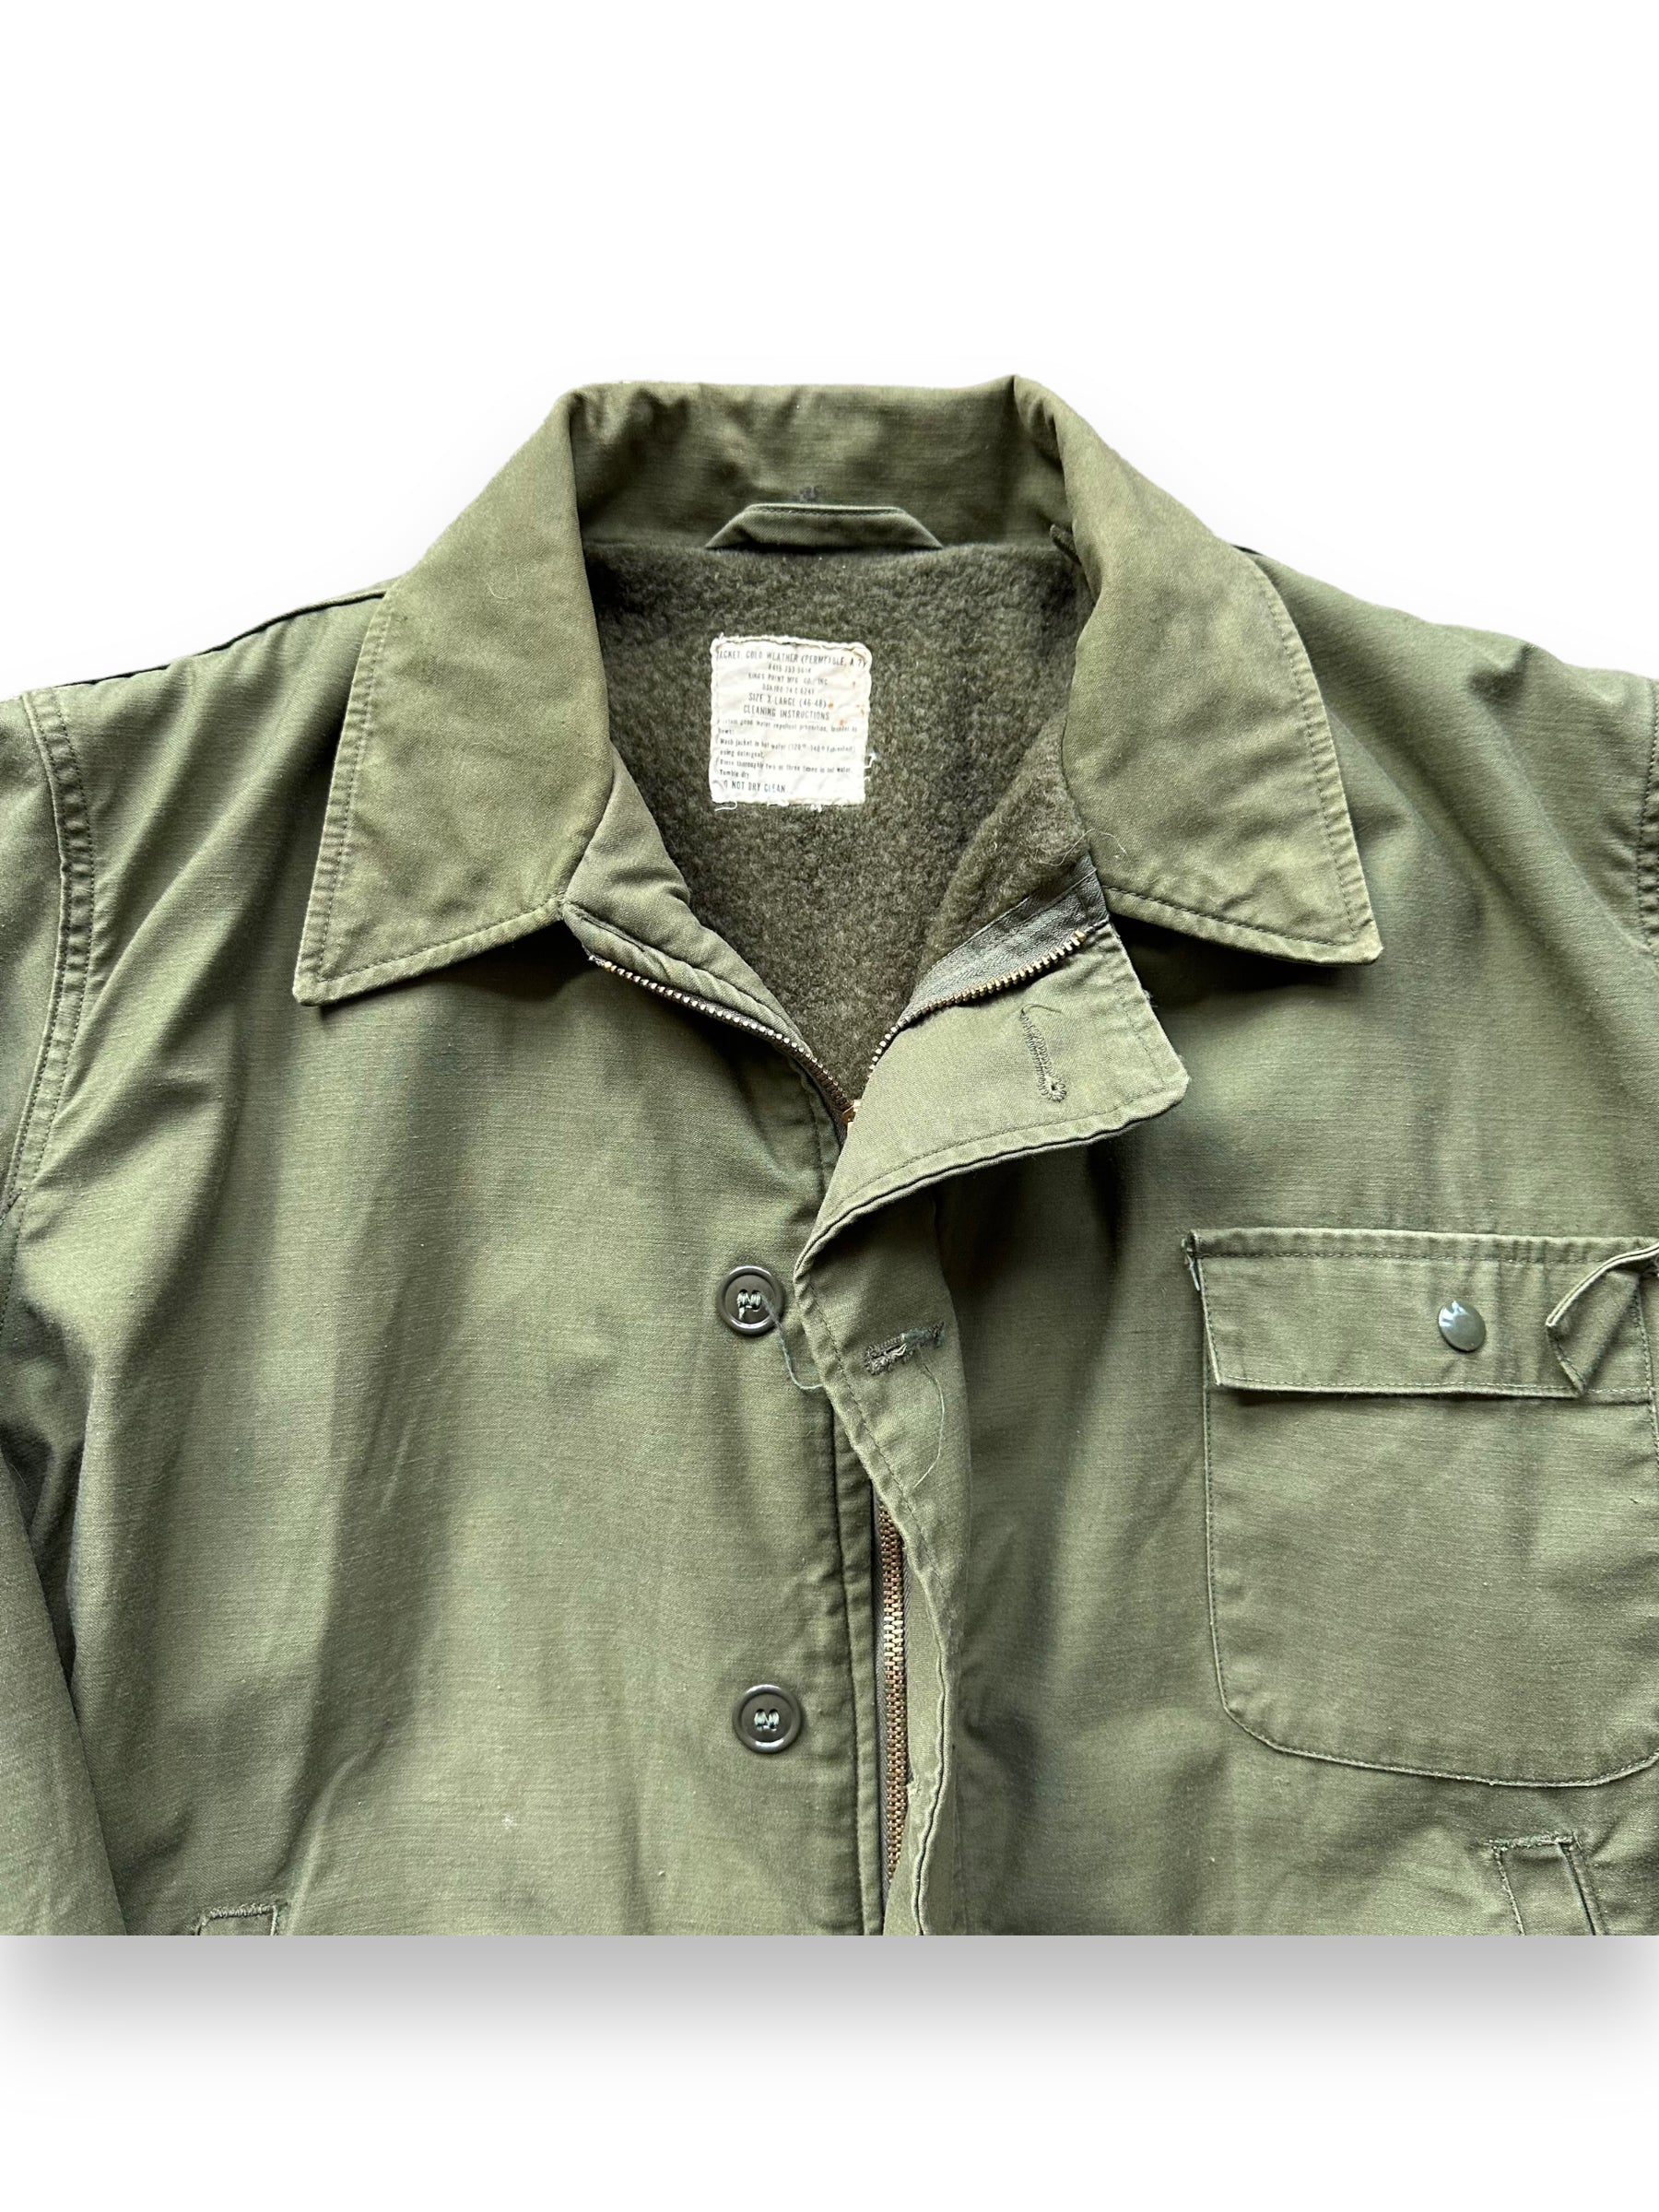 Upper Front View of Vintage Viet Nam Era Cold Weather A-2 Jacket SZ XL | Vintage Military Jackets Seattle | Barn Owl Vintage Clothing Seattle